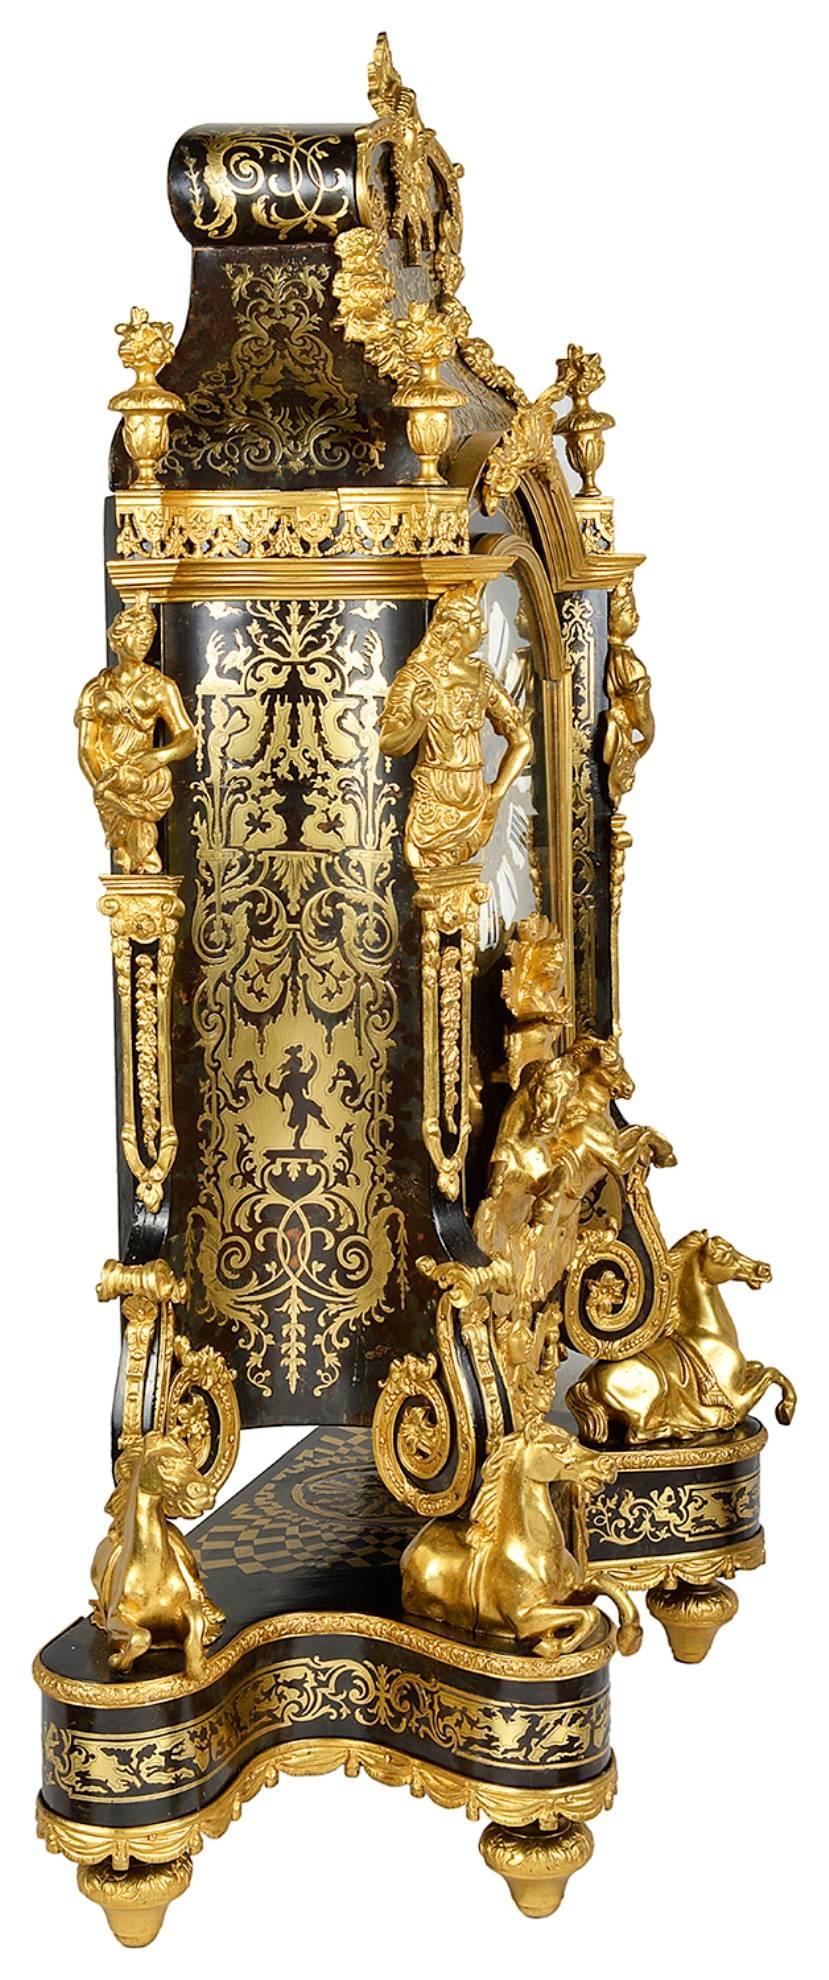 Large, 19th Century Boulle inlaid Mantel clock 1